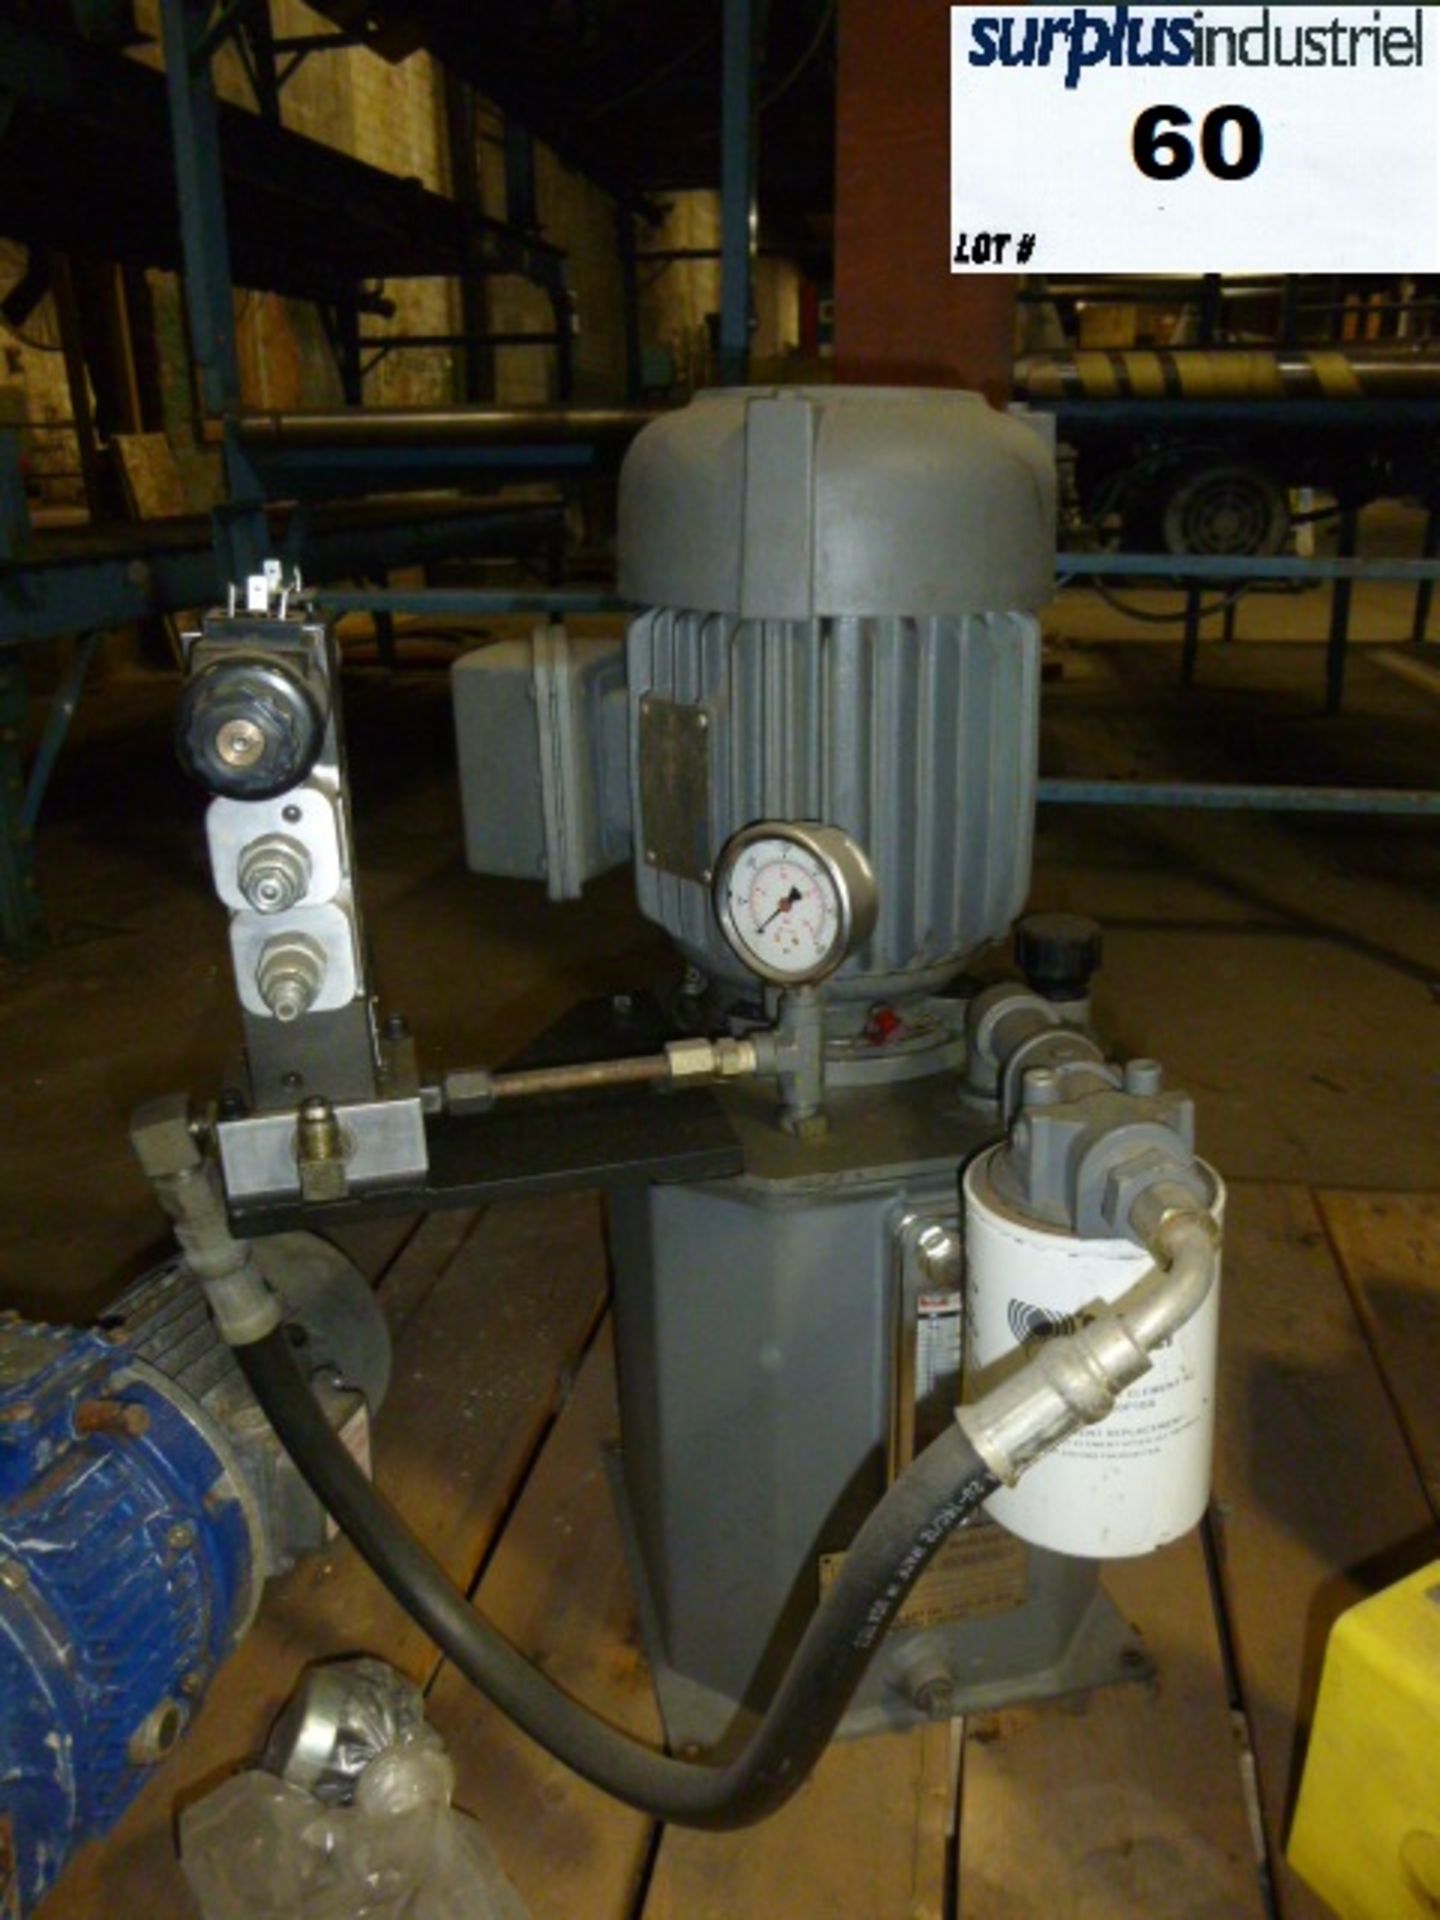 Hydraulic pump Brand: Montreal Hydraulique Model: 1.32 GPM Year: 2003 Item Location: Montreal